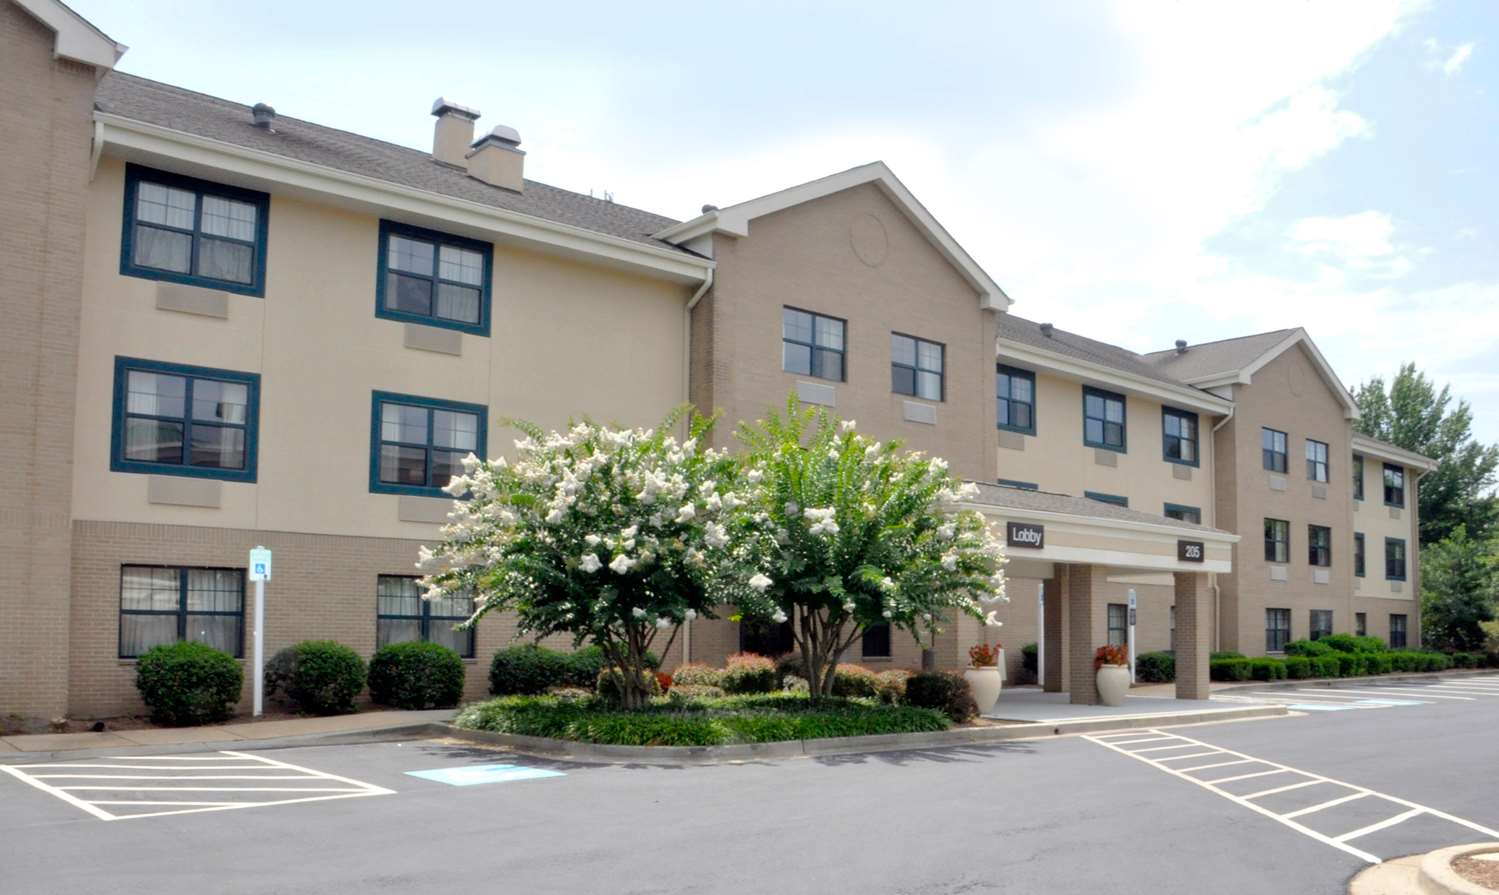 Pet Friendly Extended Stay America - Washington D.C. - Gaithersburg - South in Gaithersburg, Maryland